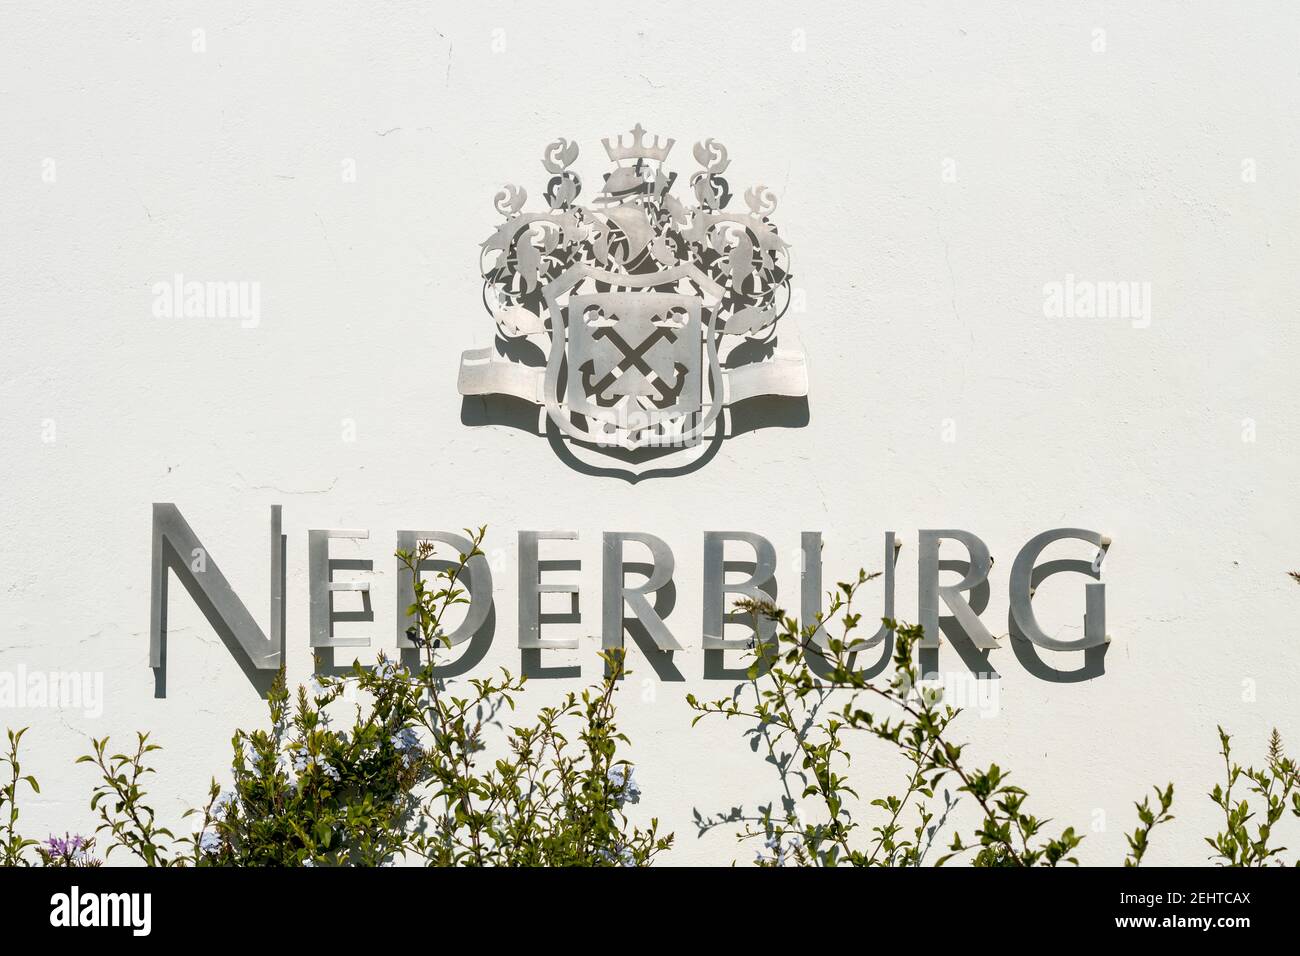 Nederburg wine estate name on the wall entrance in Paarl, Cape Winelands, South Africa concept wine industry Stock Photo